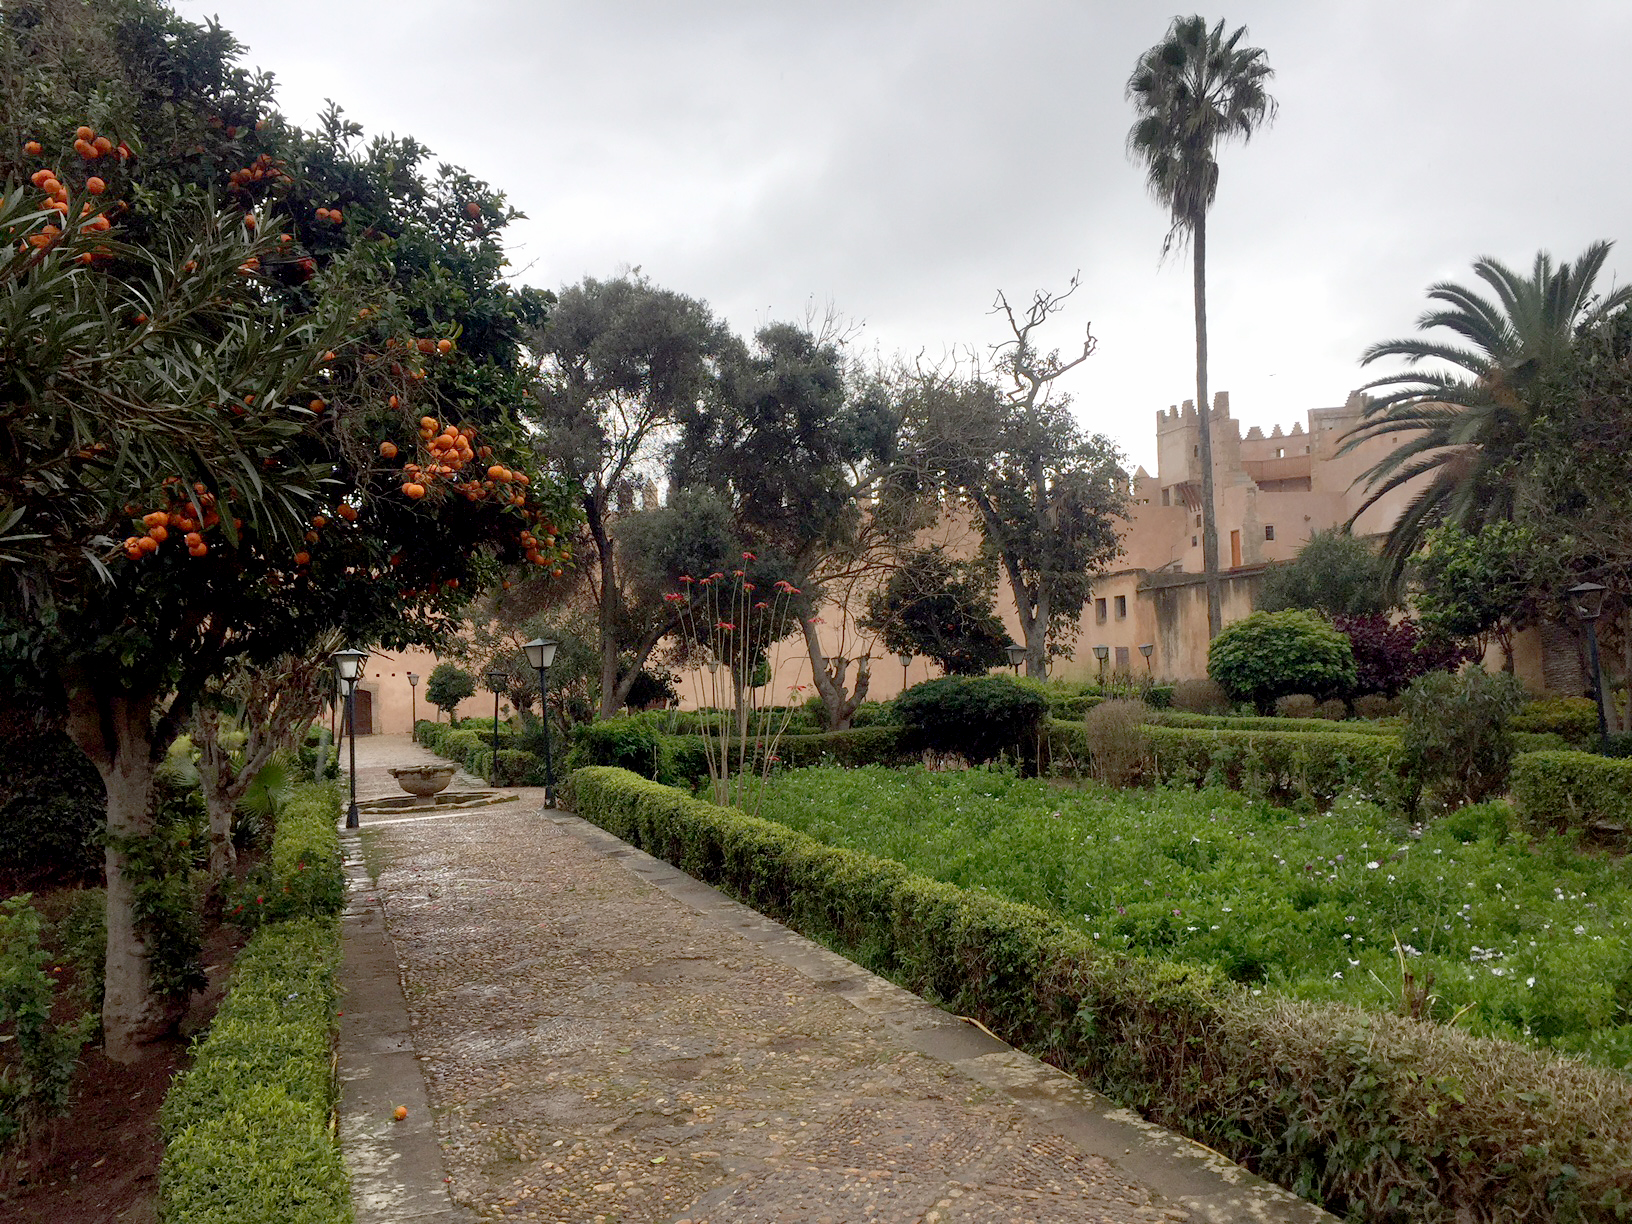 The Kasbah of the Udayas has become a tourist attraction in Rabat and a world heritage site